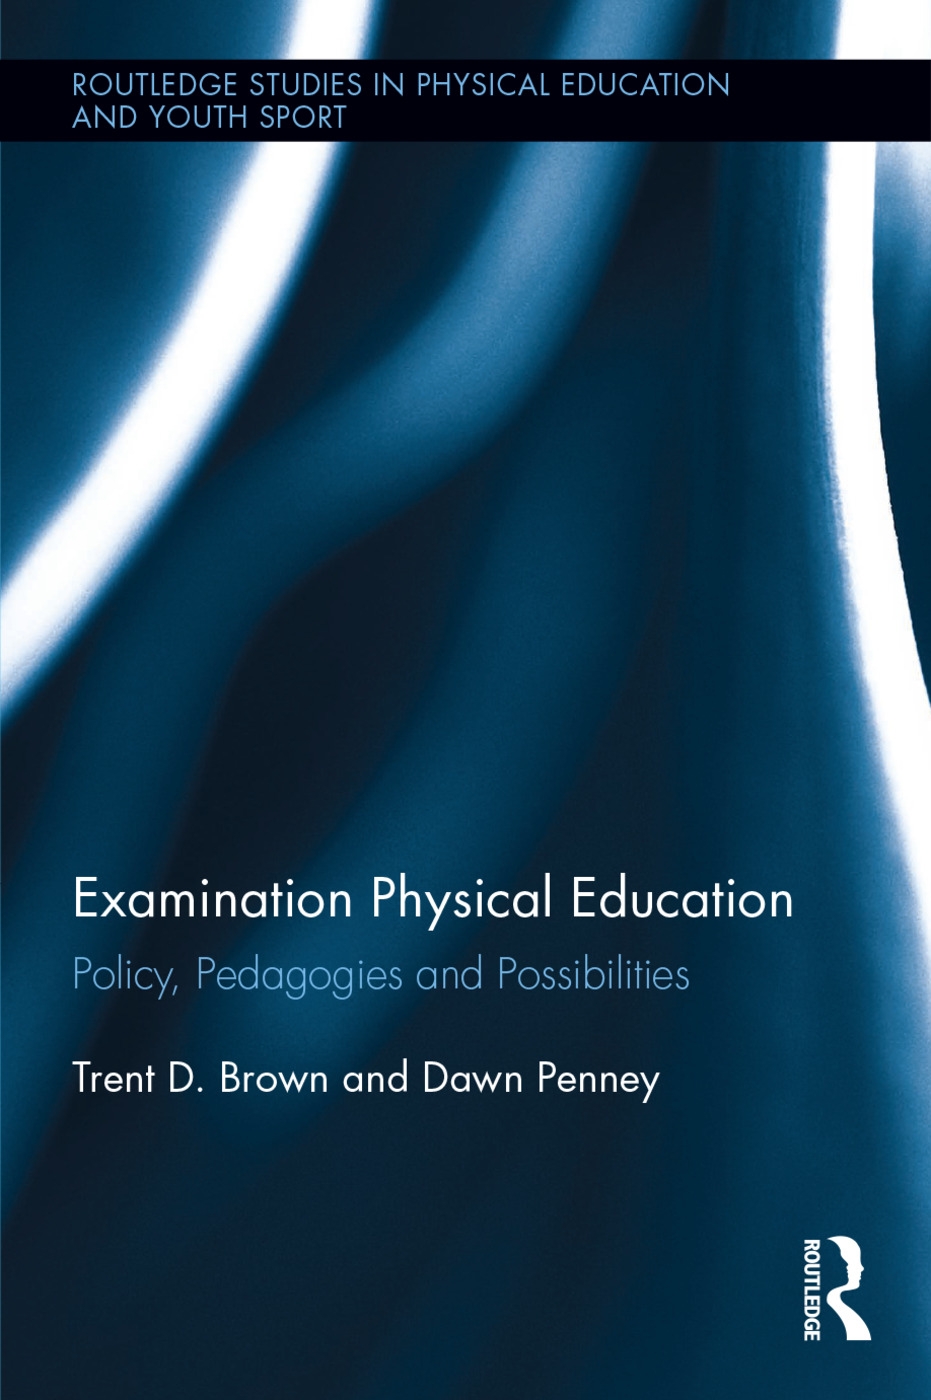 Examination Physical Education: Policy, Pedagogies and Possibilities